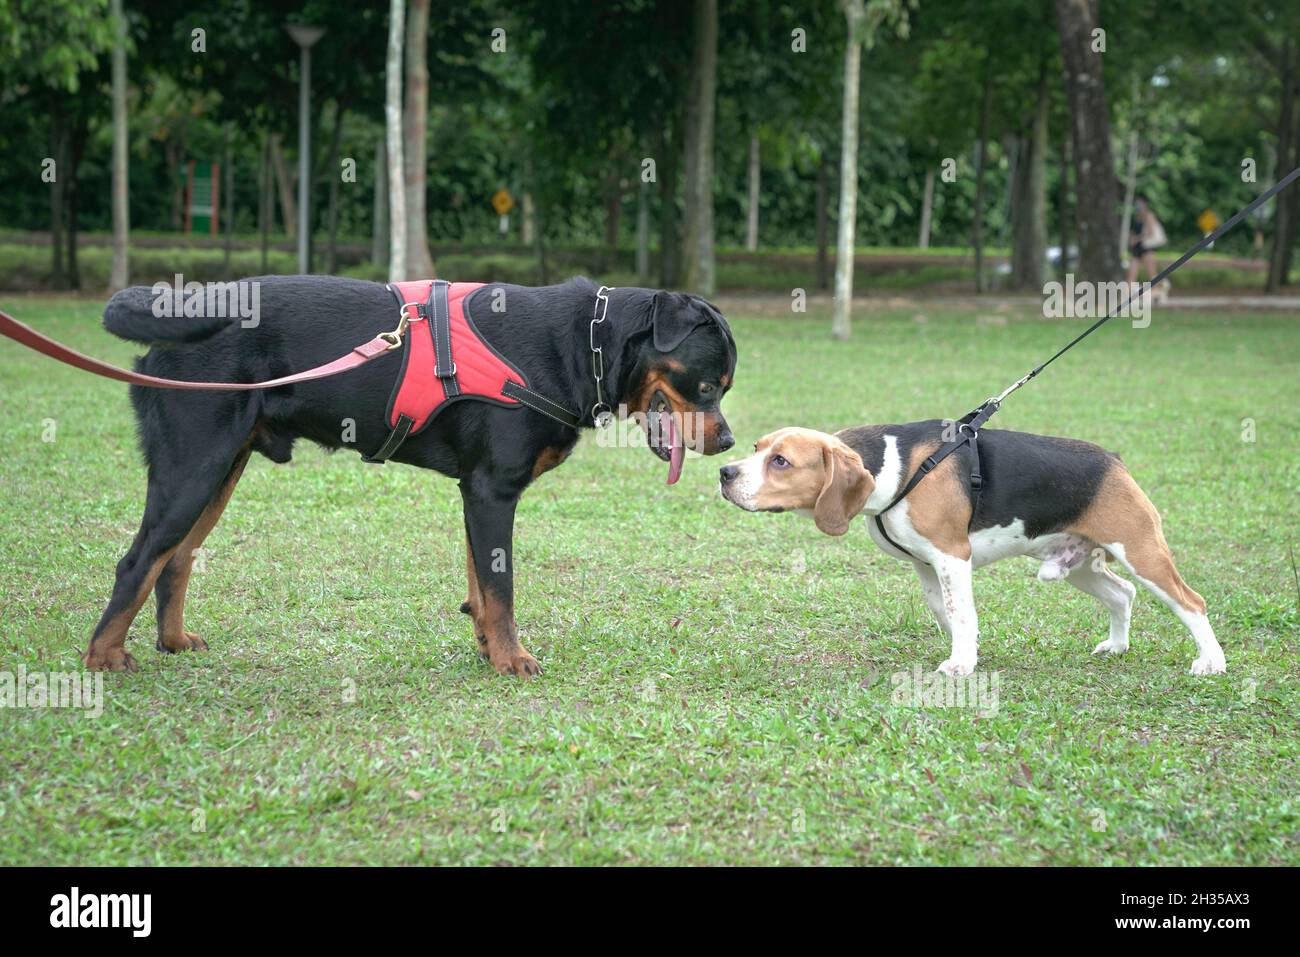 Two dogs, Beagle and Rottweiler greet by sniffing each other. Dog socializing concept. Stock Photo